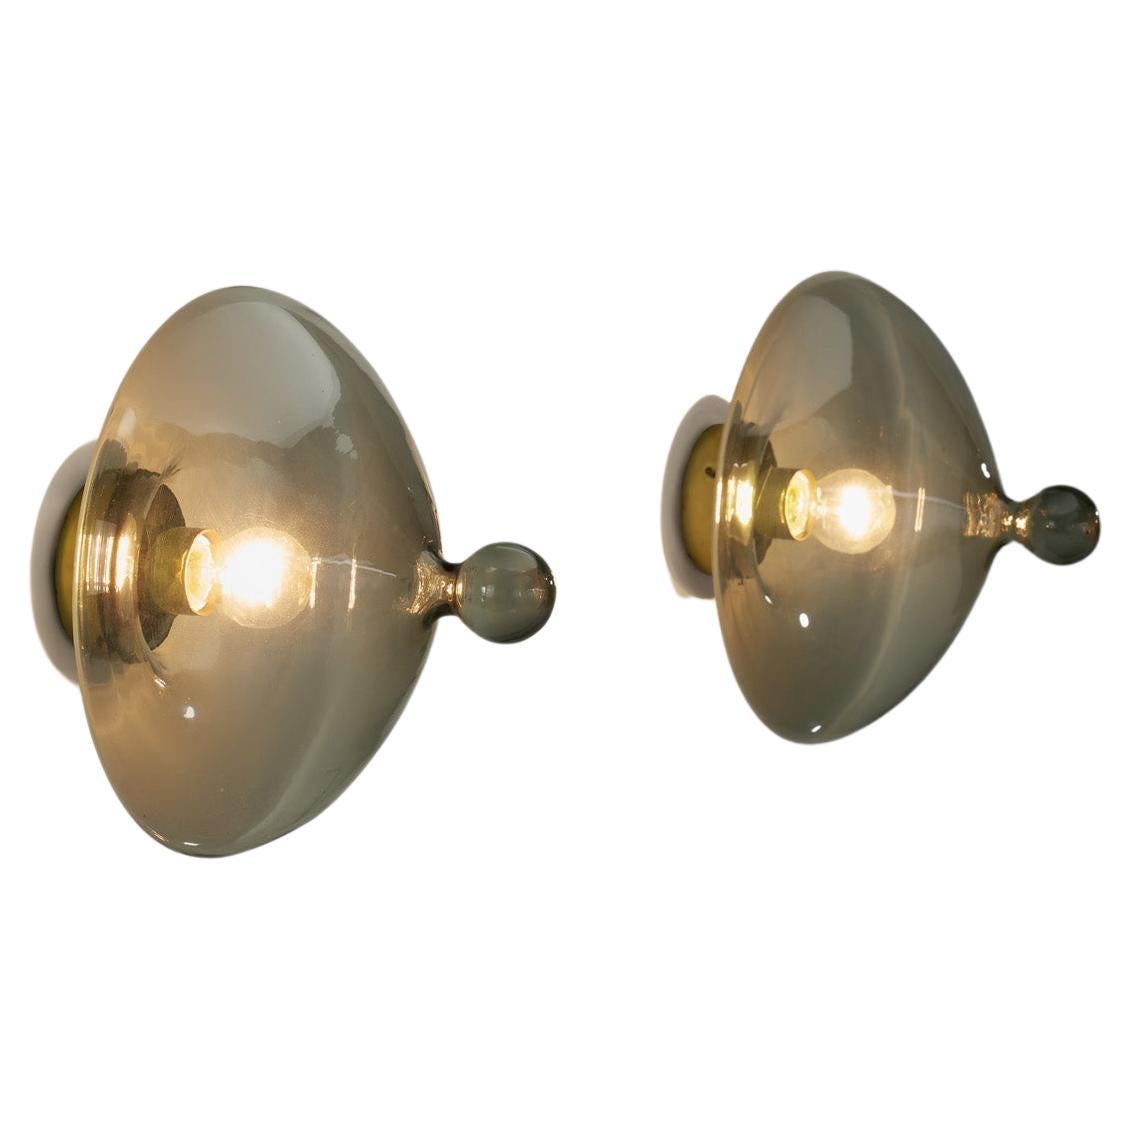 “Chaparral” Wall Lamps by Raak, The Netherlands 1960s